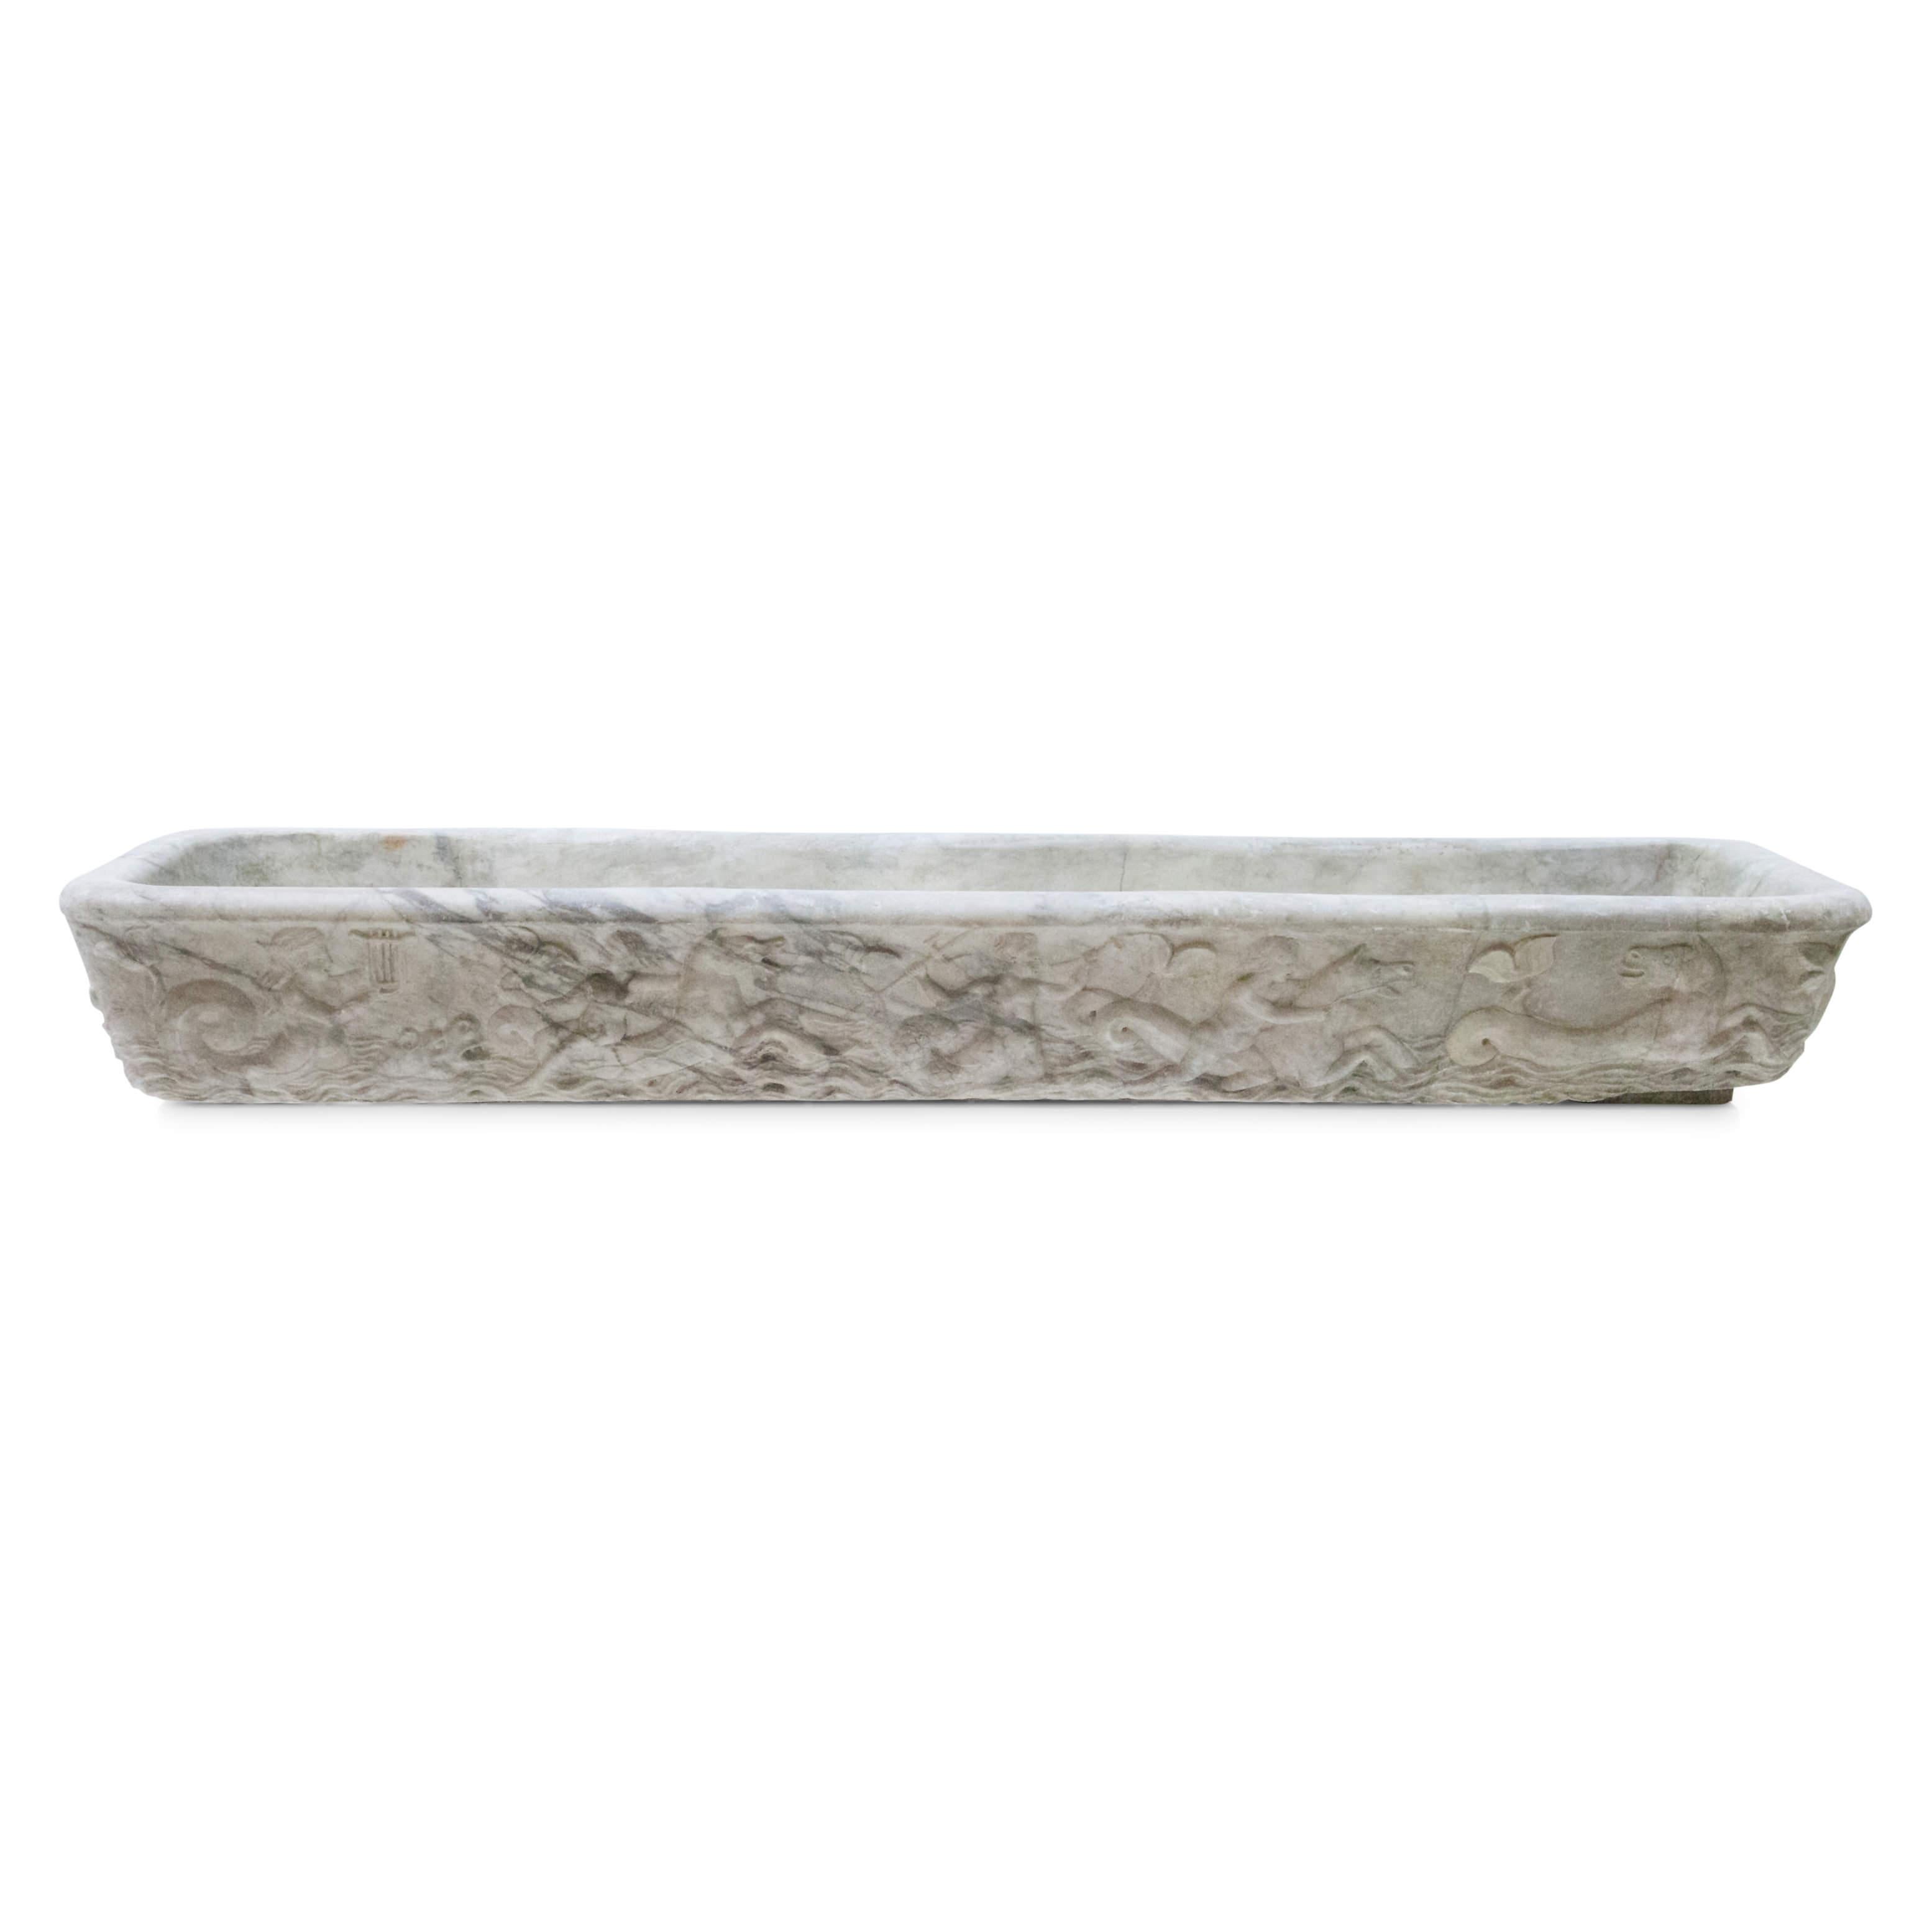 Long rectangular fountain basin in Carrara marble with relief depiction of mythological scenes on the wall.
 